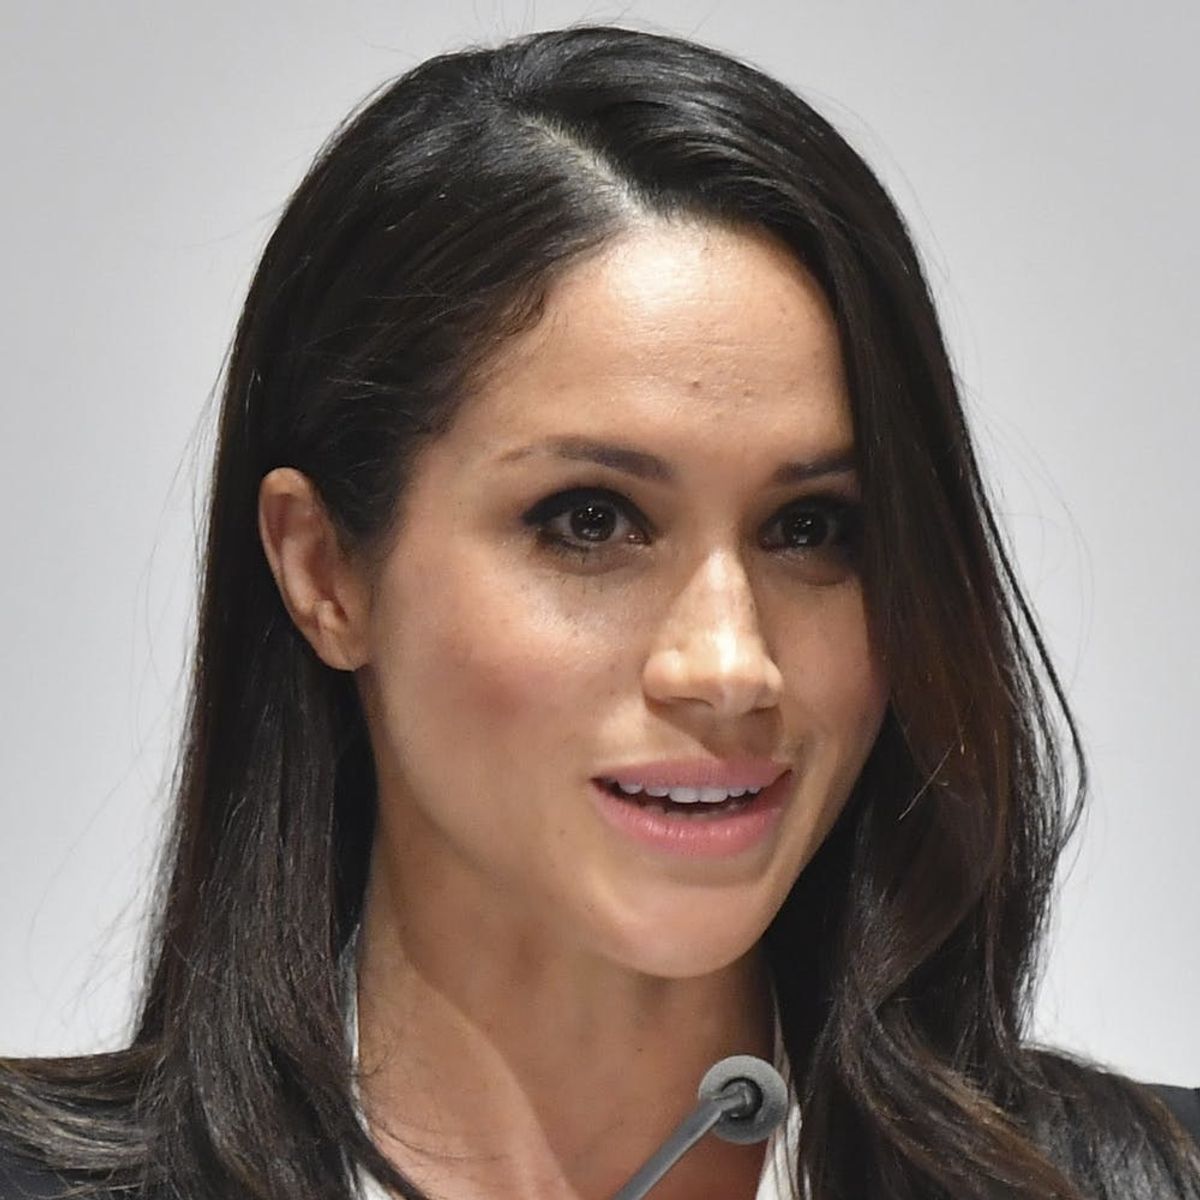 Meghan Markle Gets in on the Reigning Pantsuit Trend for Her First Black-Tie Event With Prince Harry